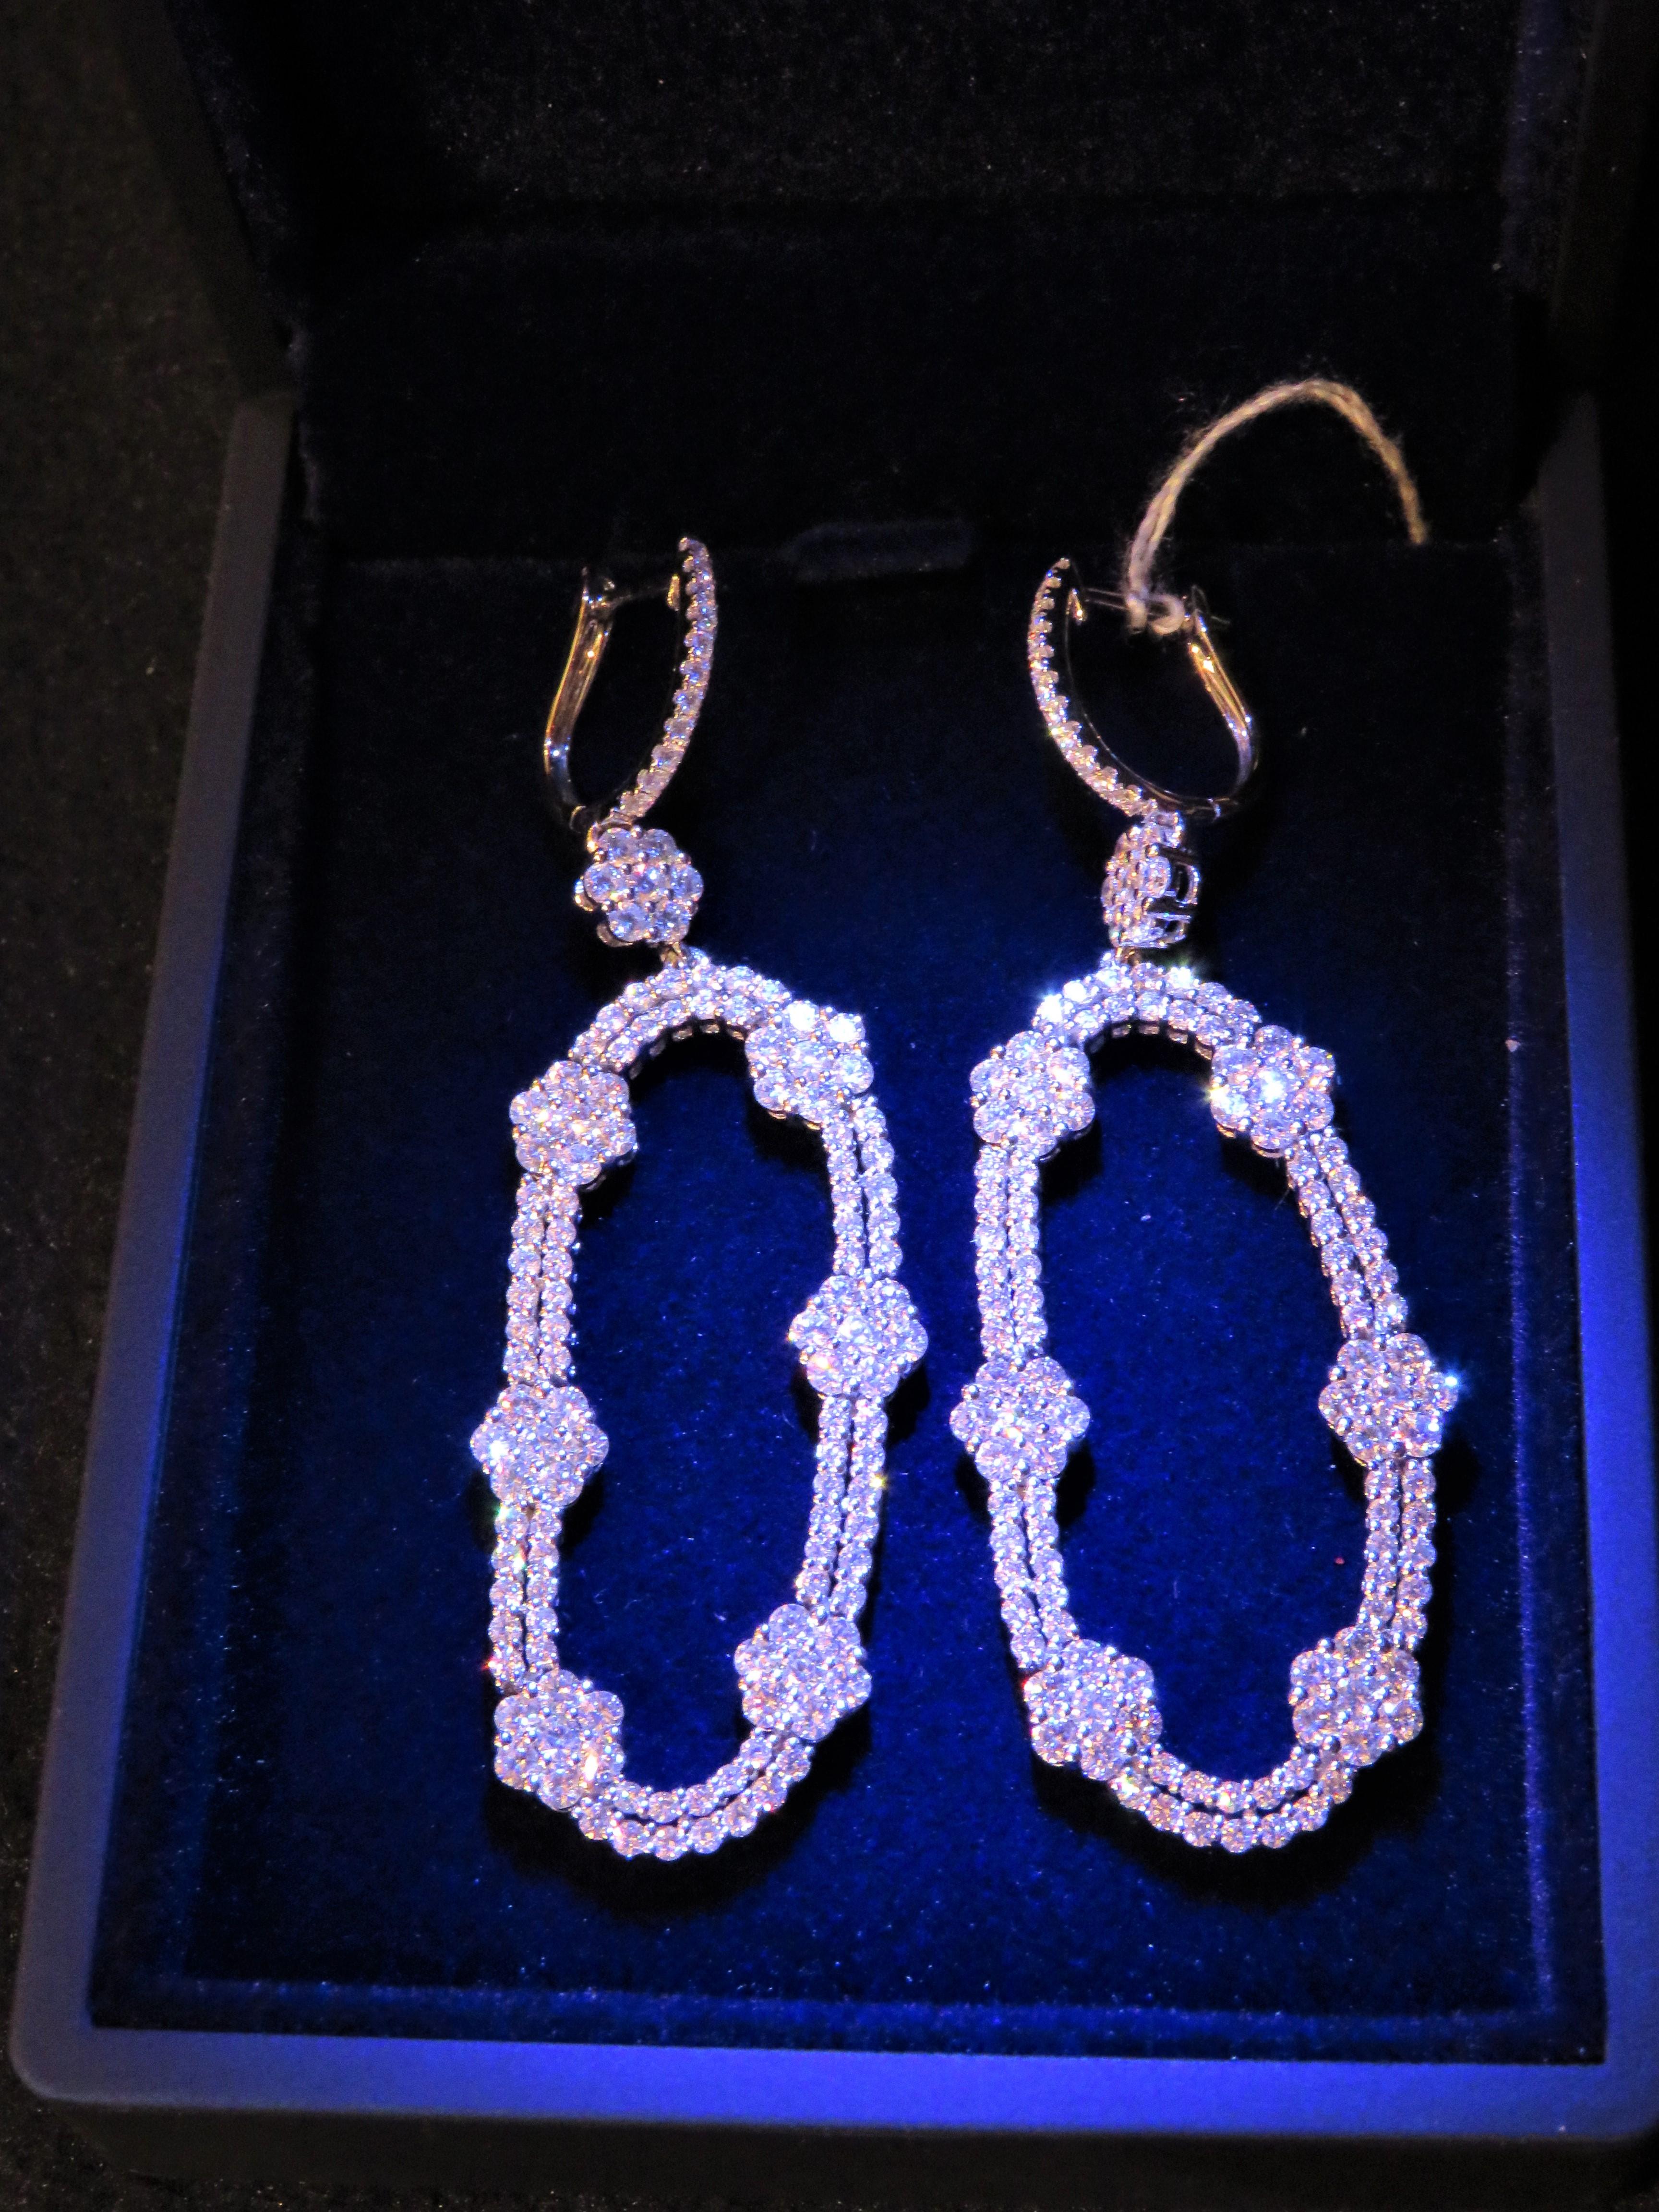 The Following Items we are offering is a Rare Important Radiant 18KT Yellow Gold and 18KT Gold Gorgeous Glittering Baguette Diamond Dangle Earrings. Earrings Feature Gorgeous Rare Fancy Baguette Cut Diamonds Framed with Spectacular Glittering Round